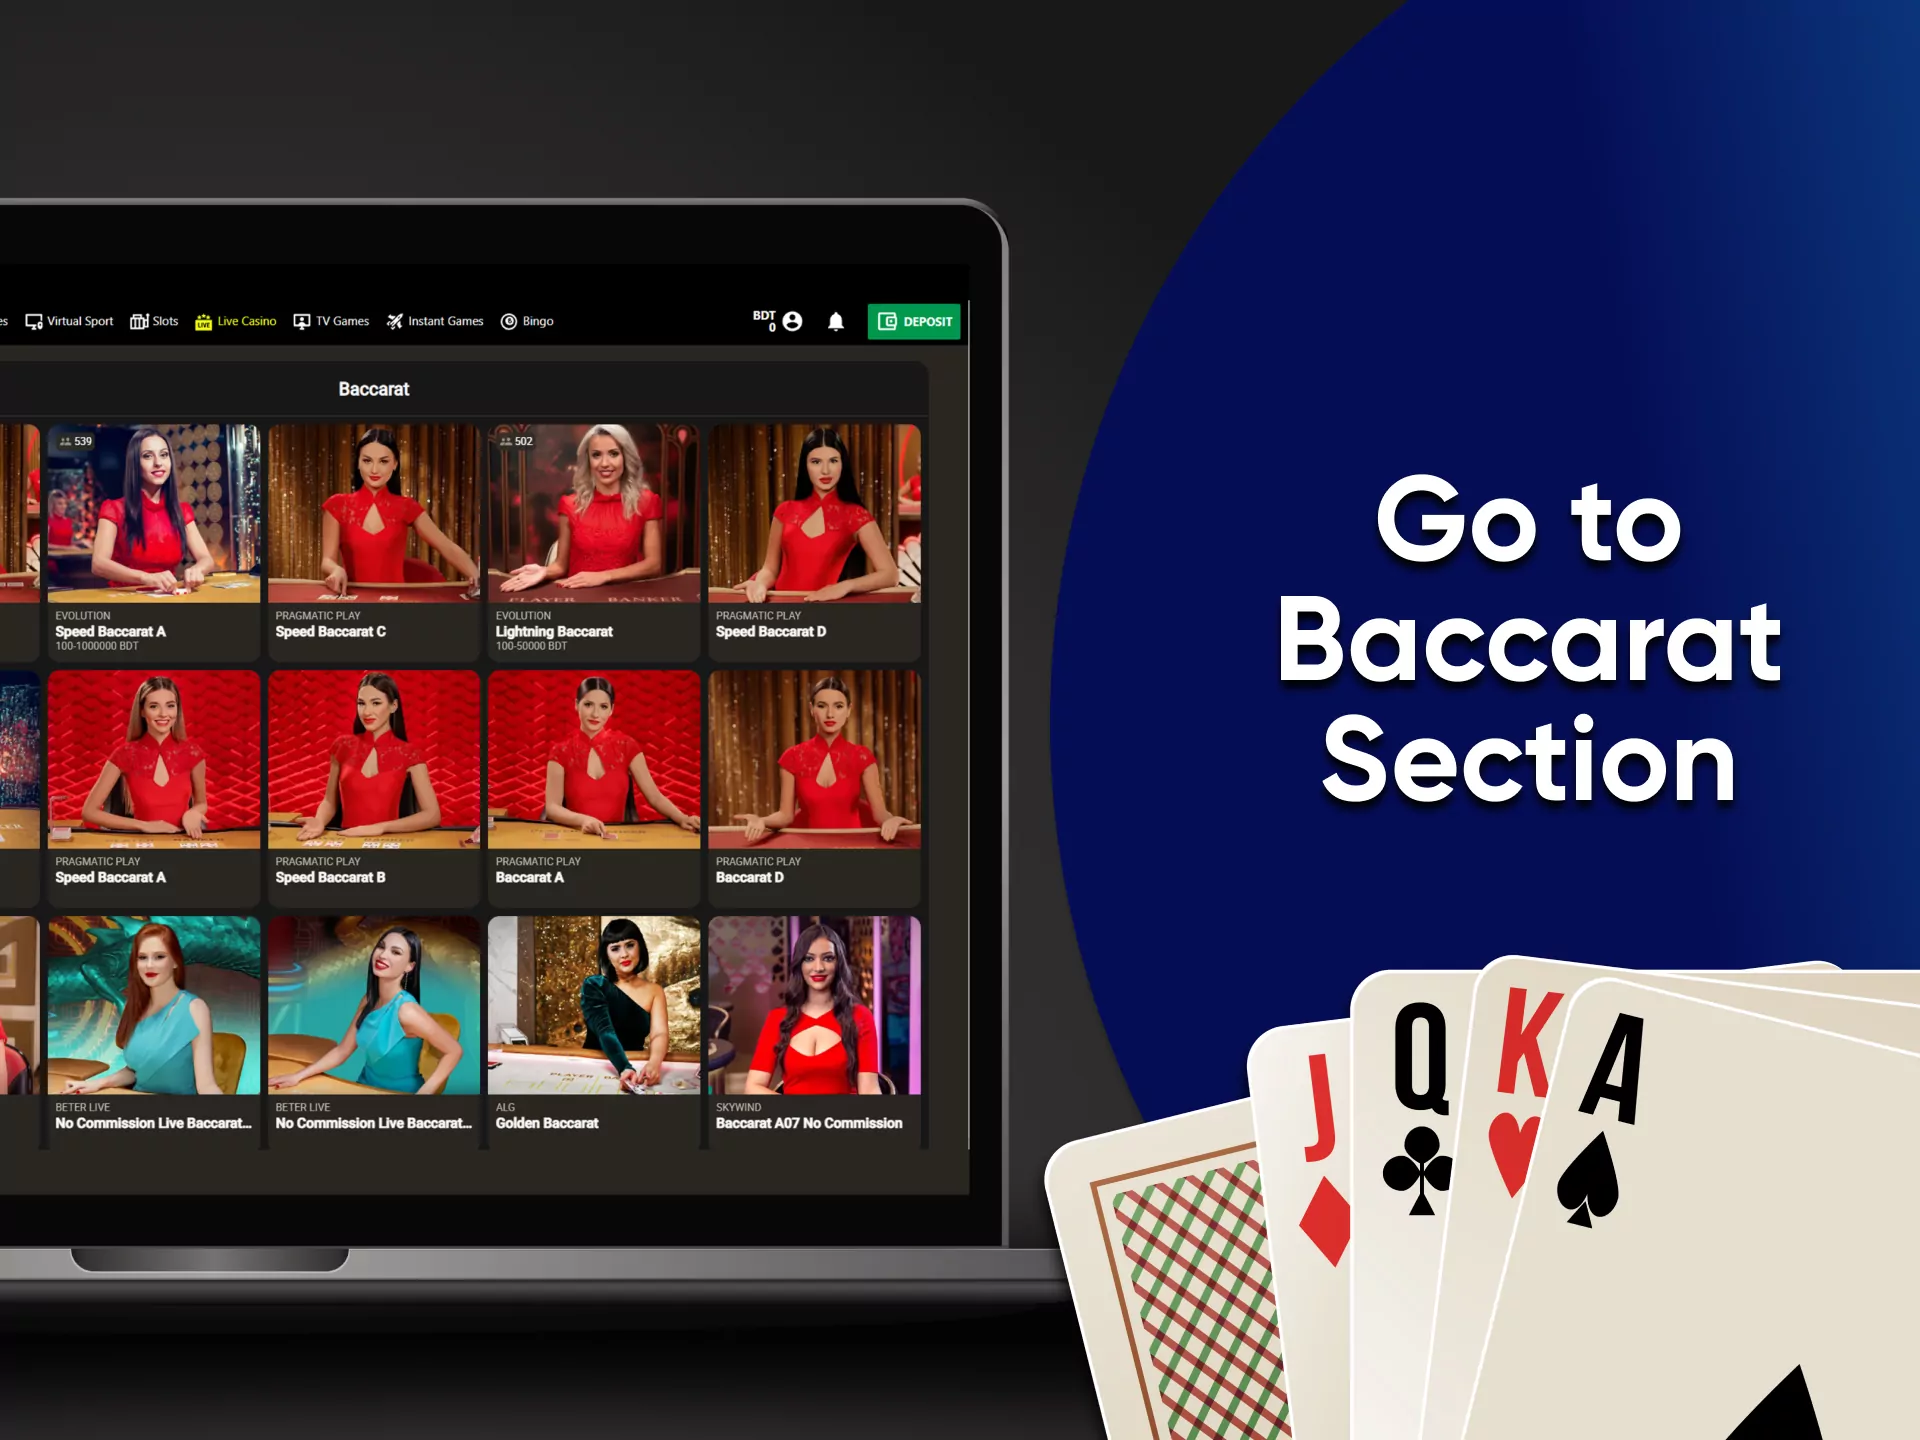 Go to the desired section to play Baccarat.